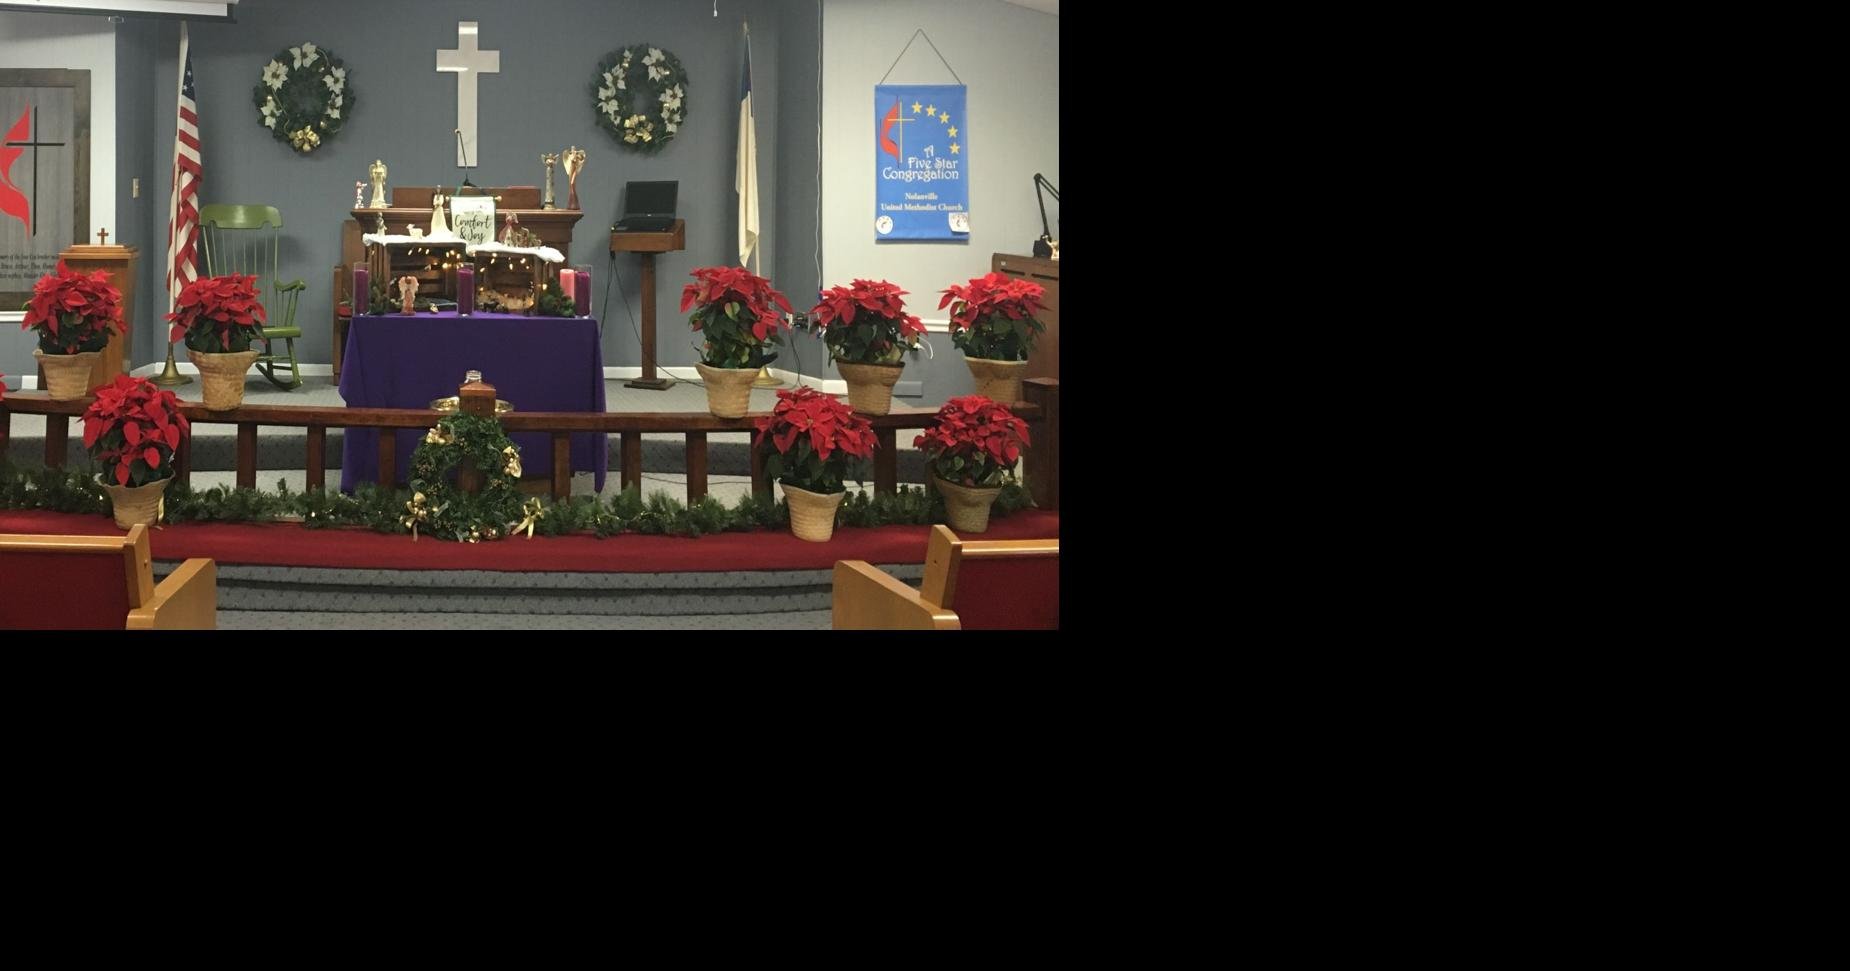 Methodist church in Nolanville holds unique and meaningful December